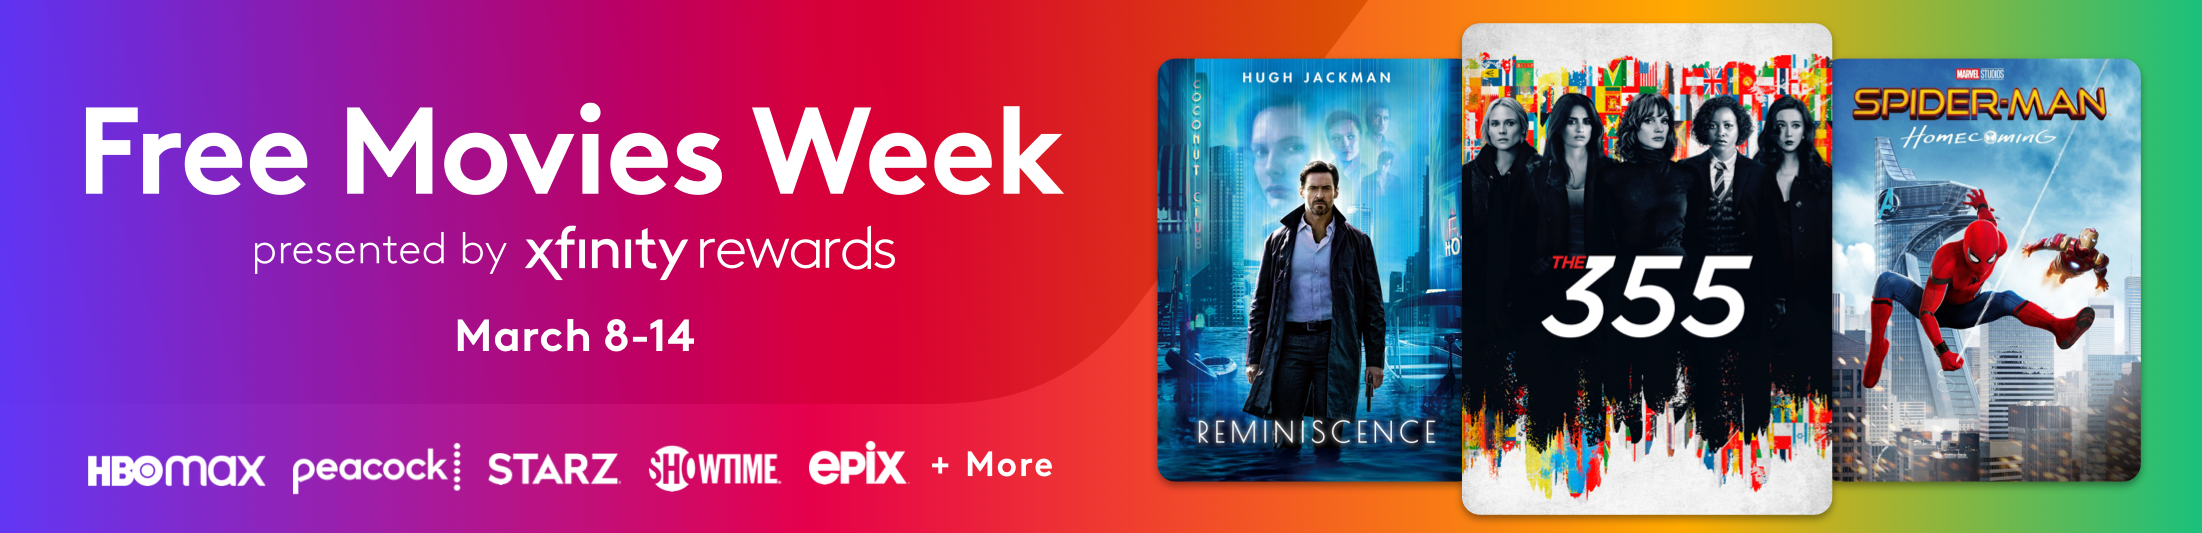 Watch Free Movies All Week Long from March 8 - 14 with Xfinity!